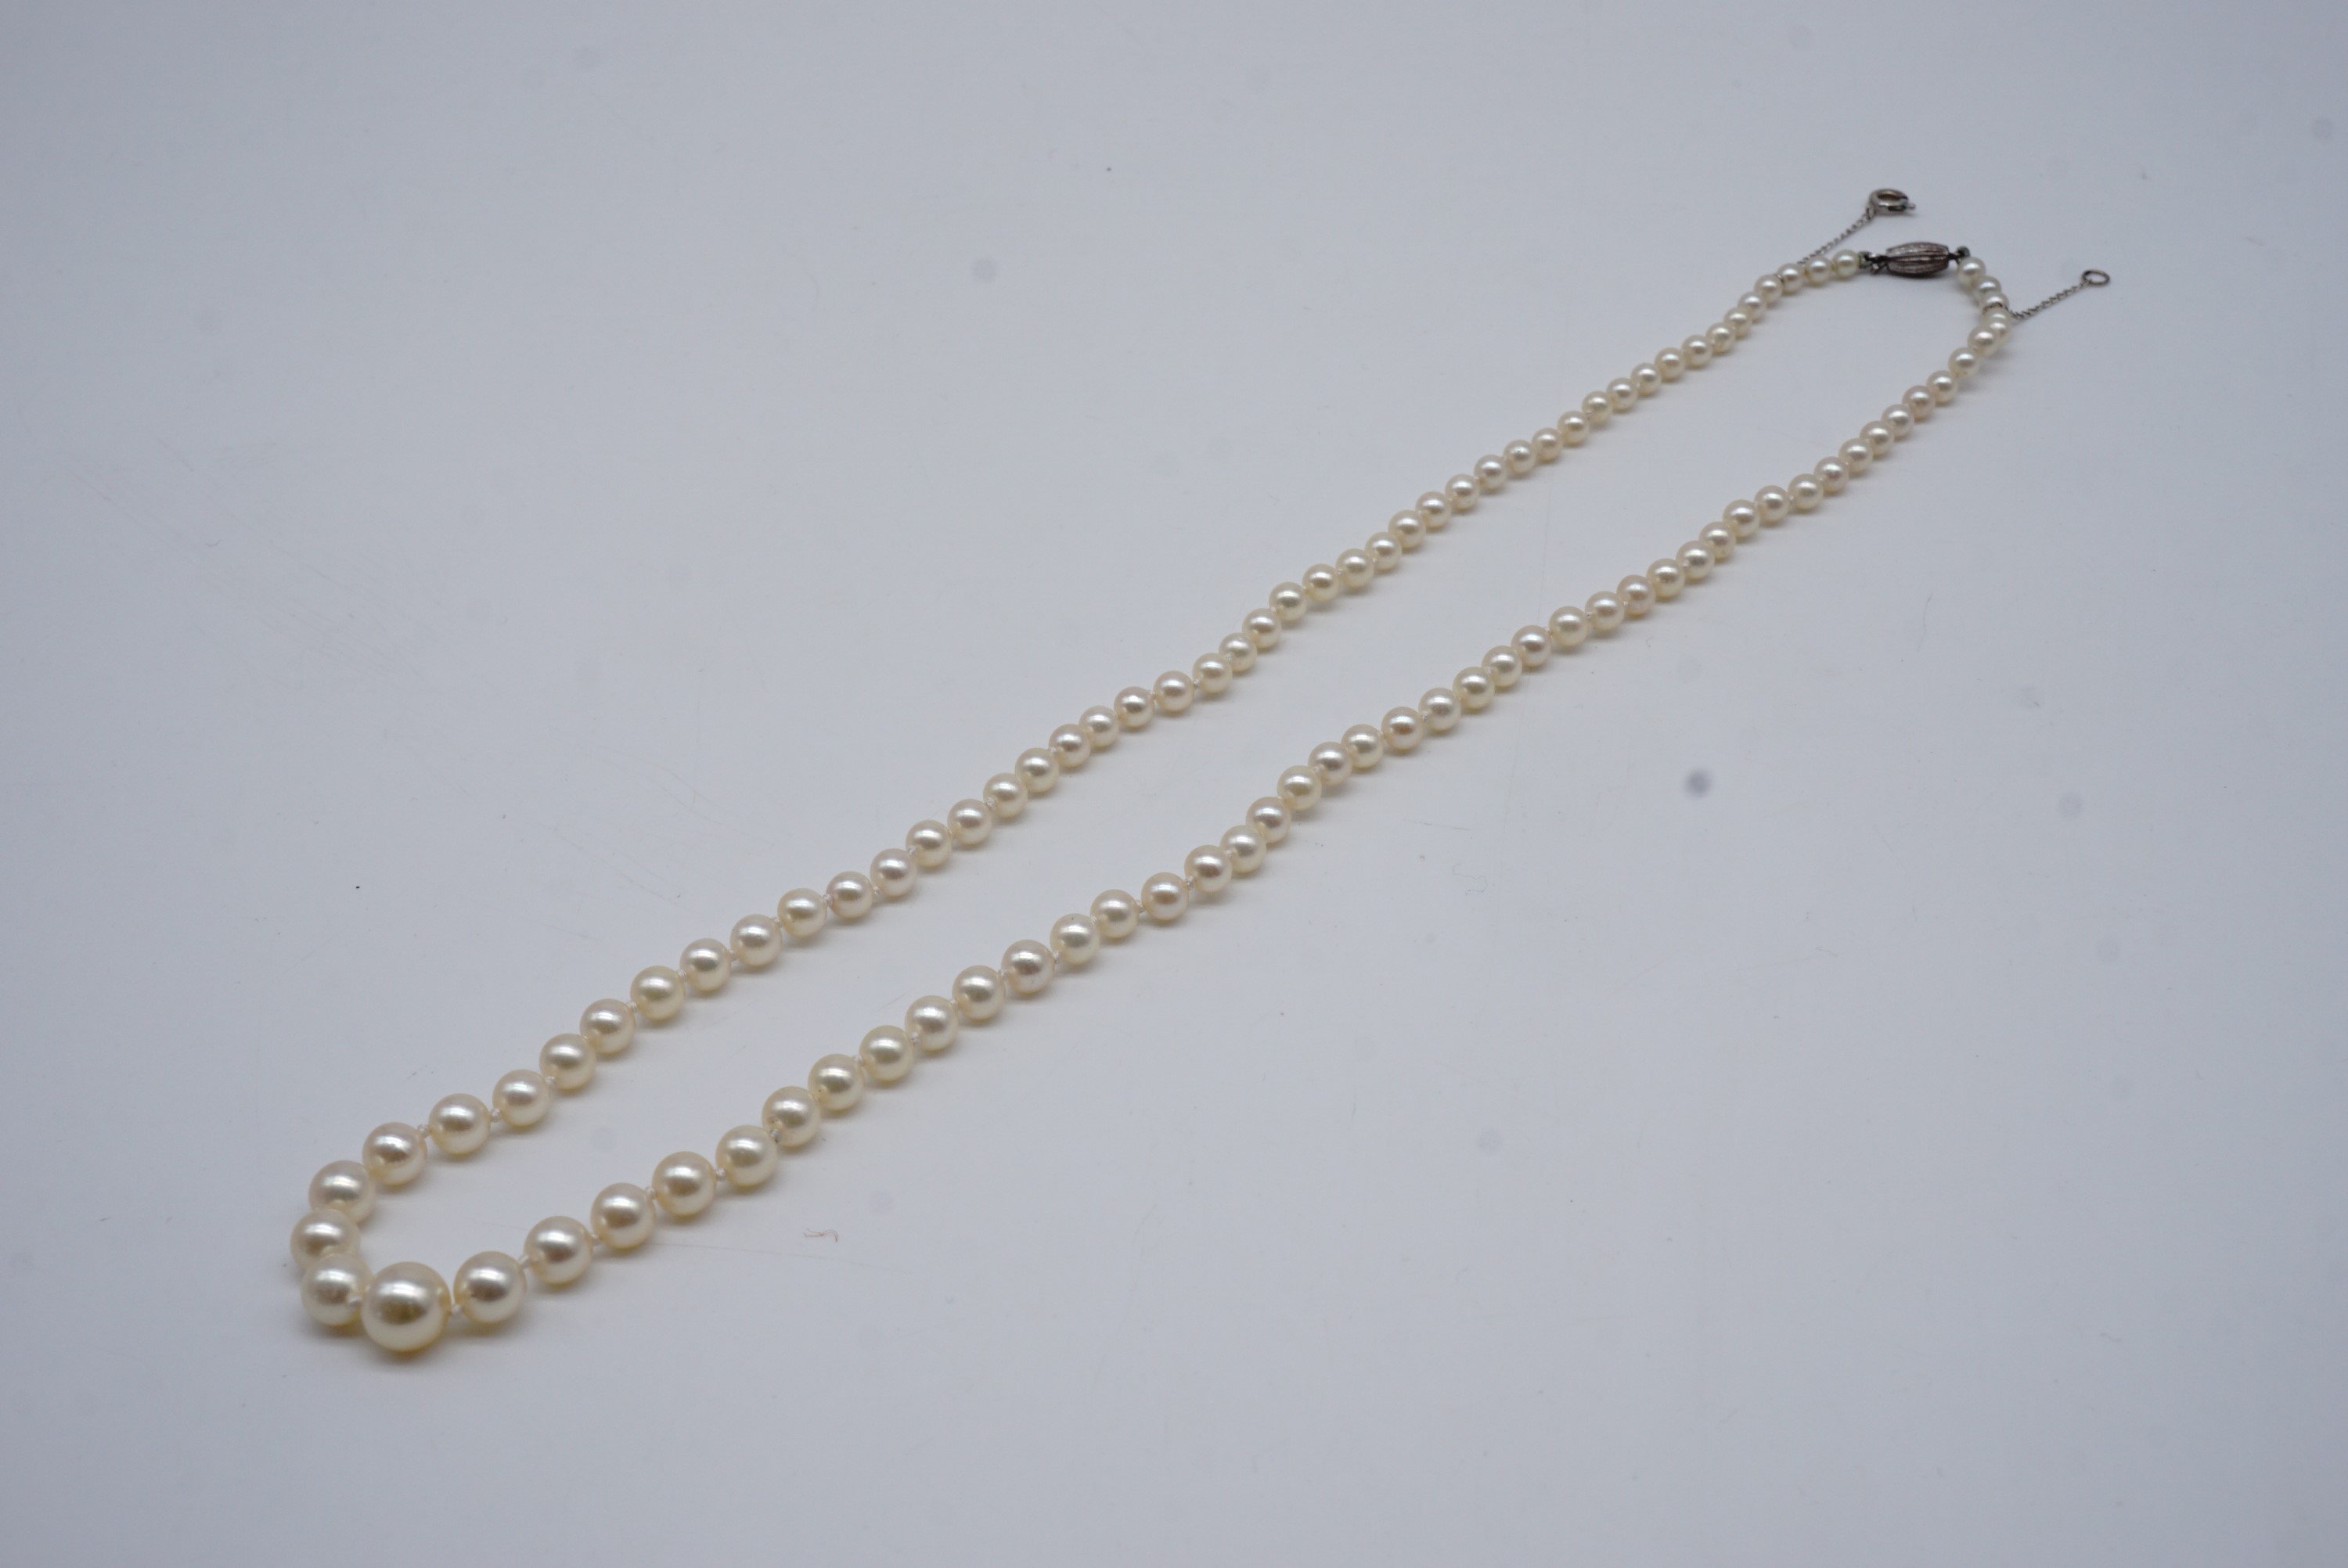 A single strand necklace of graded pearls, largest 7 mm, 49 cm - Image 3 of 3